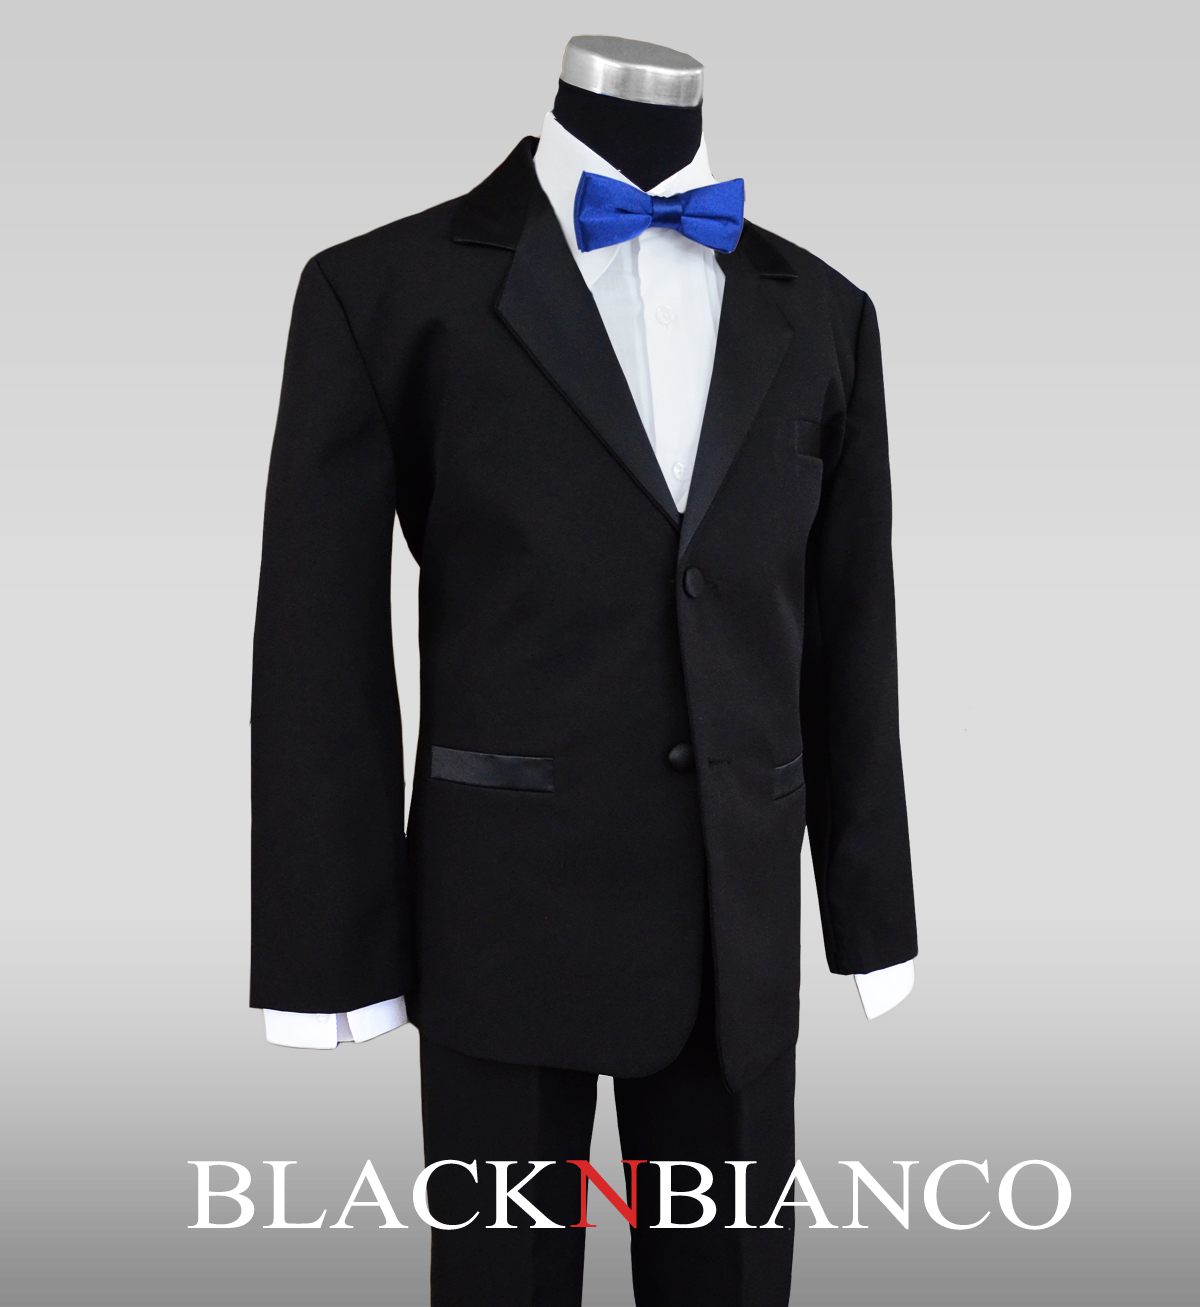 Boys Tuxedos in Black with Royal Blue Bow Tie and Black Bow Tie - image 1 of 5